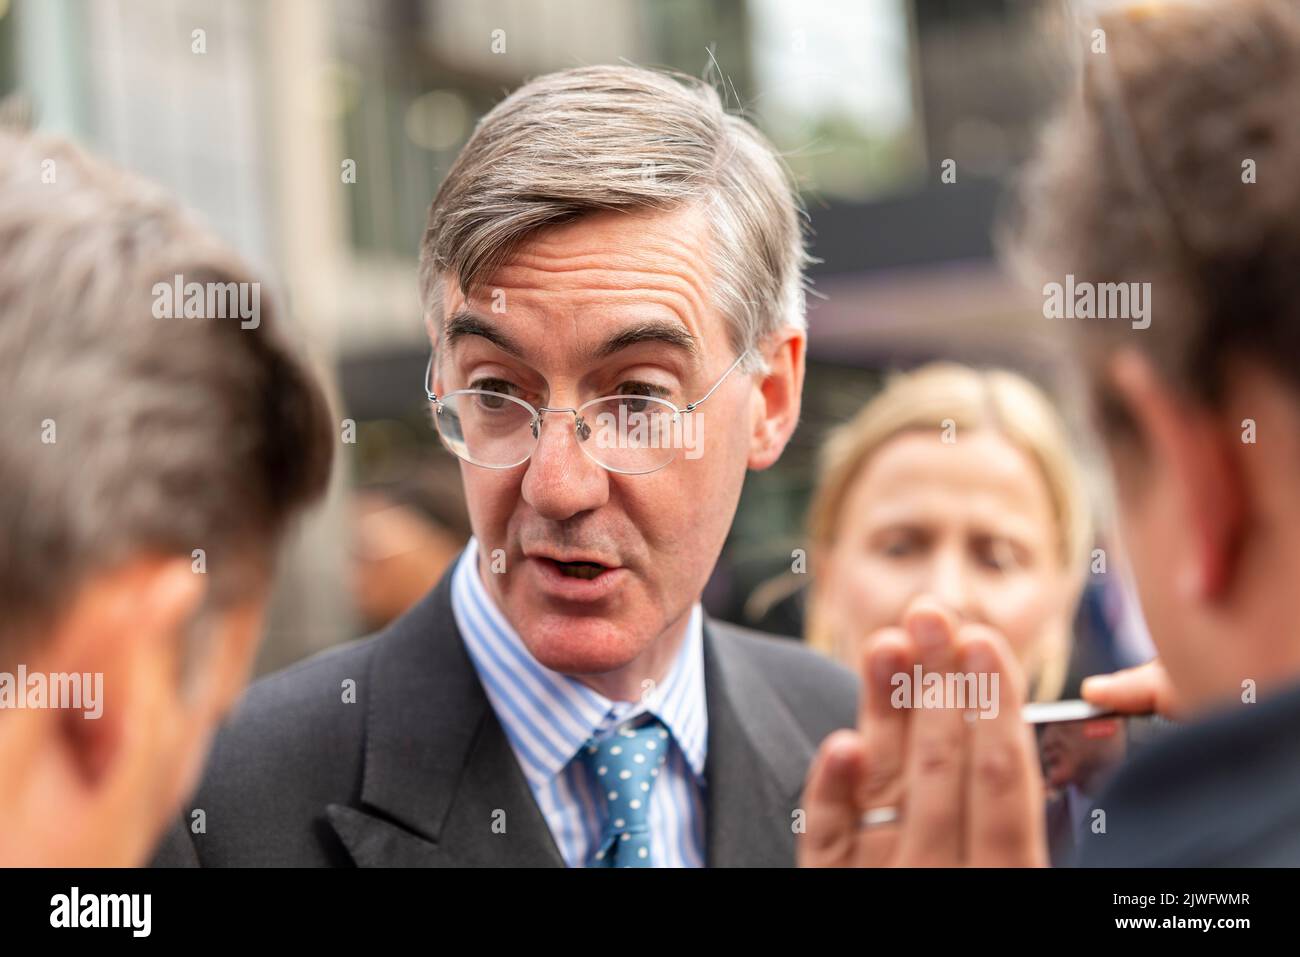 Jacob Rees-Mogg MP at the Queen Elizabeth II Centre after the Conservative party leadership announcement, London, UK. Government minister Stock Photo